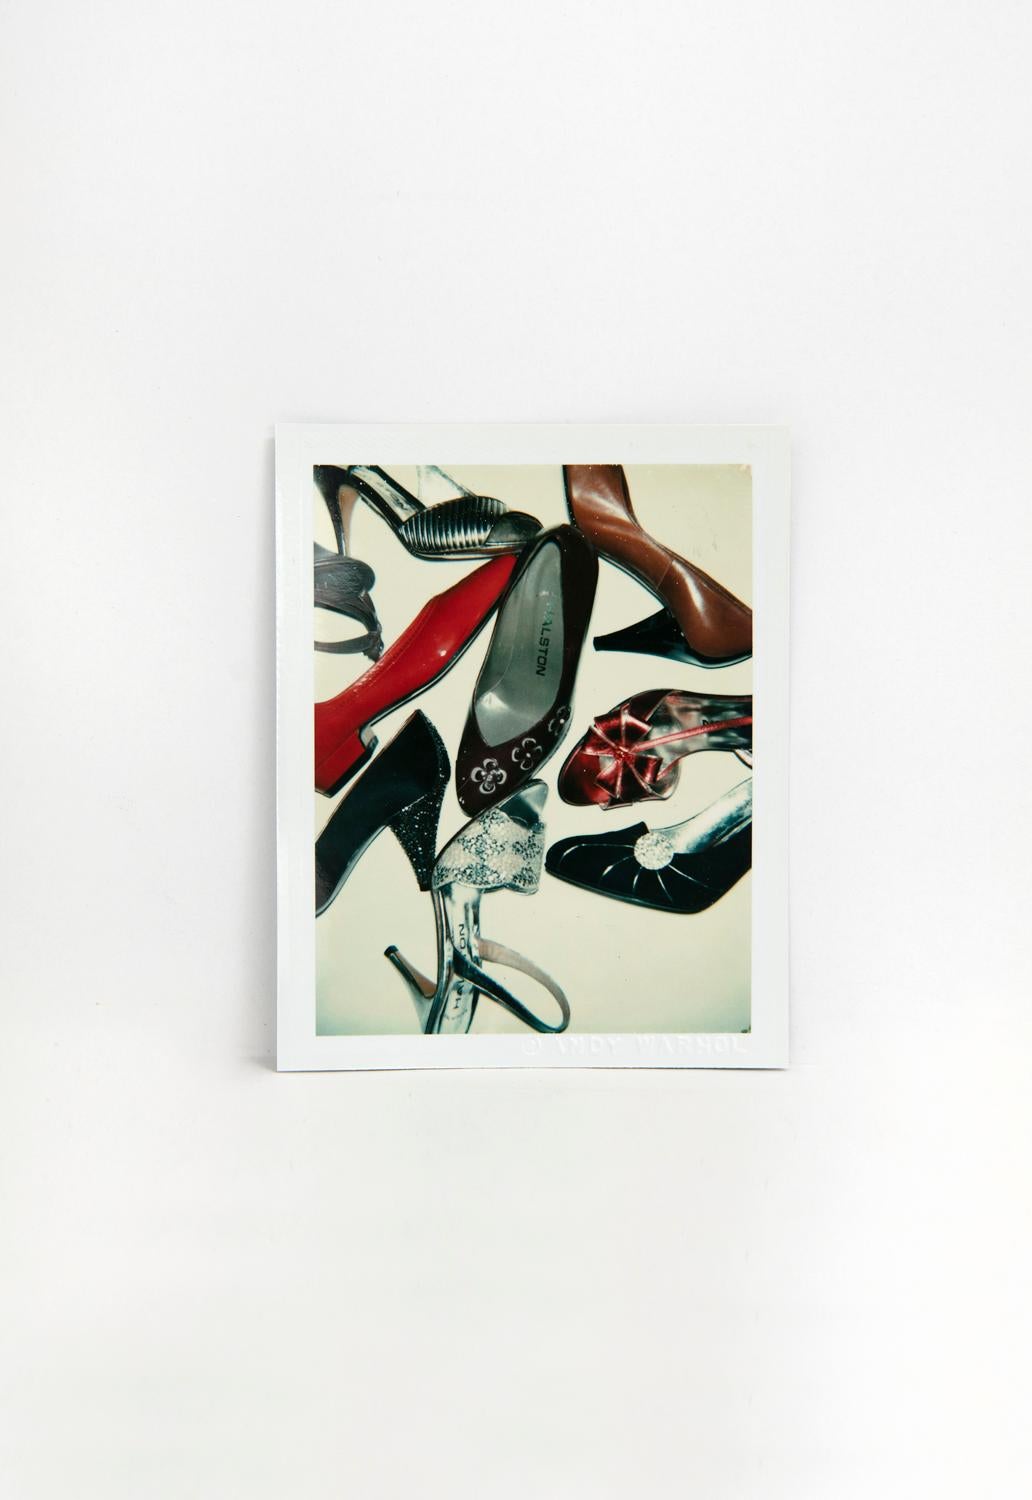 Polaroid of Shoes by Andy Warhol